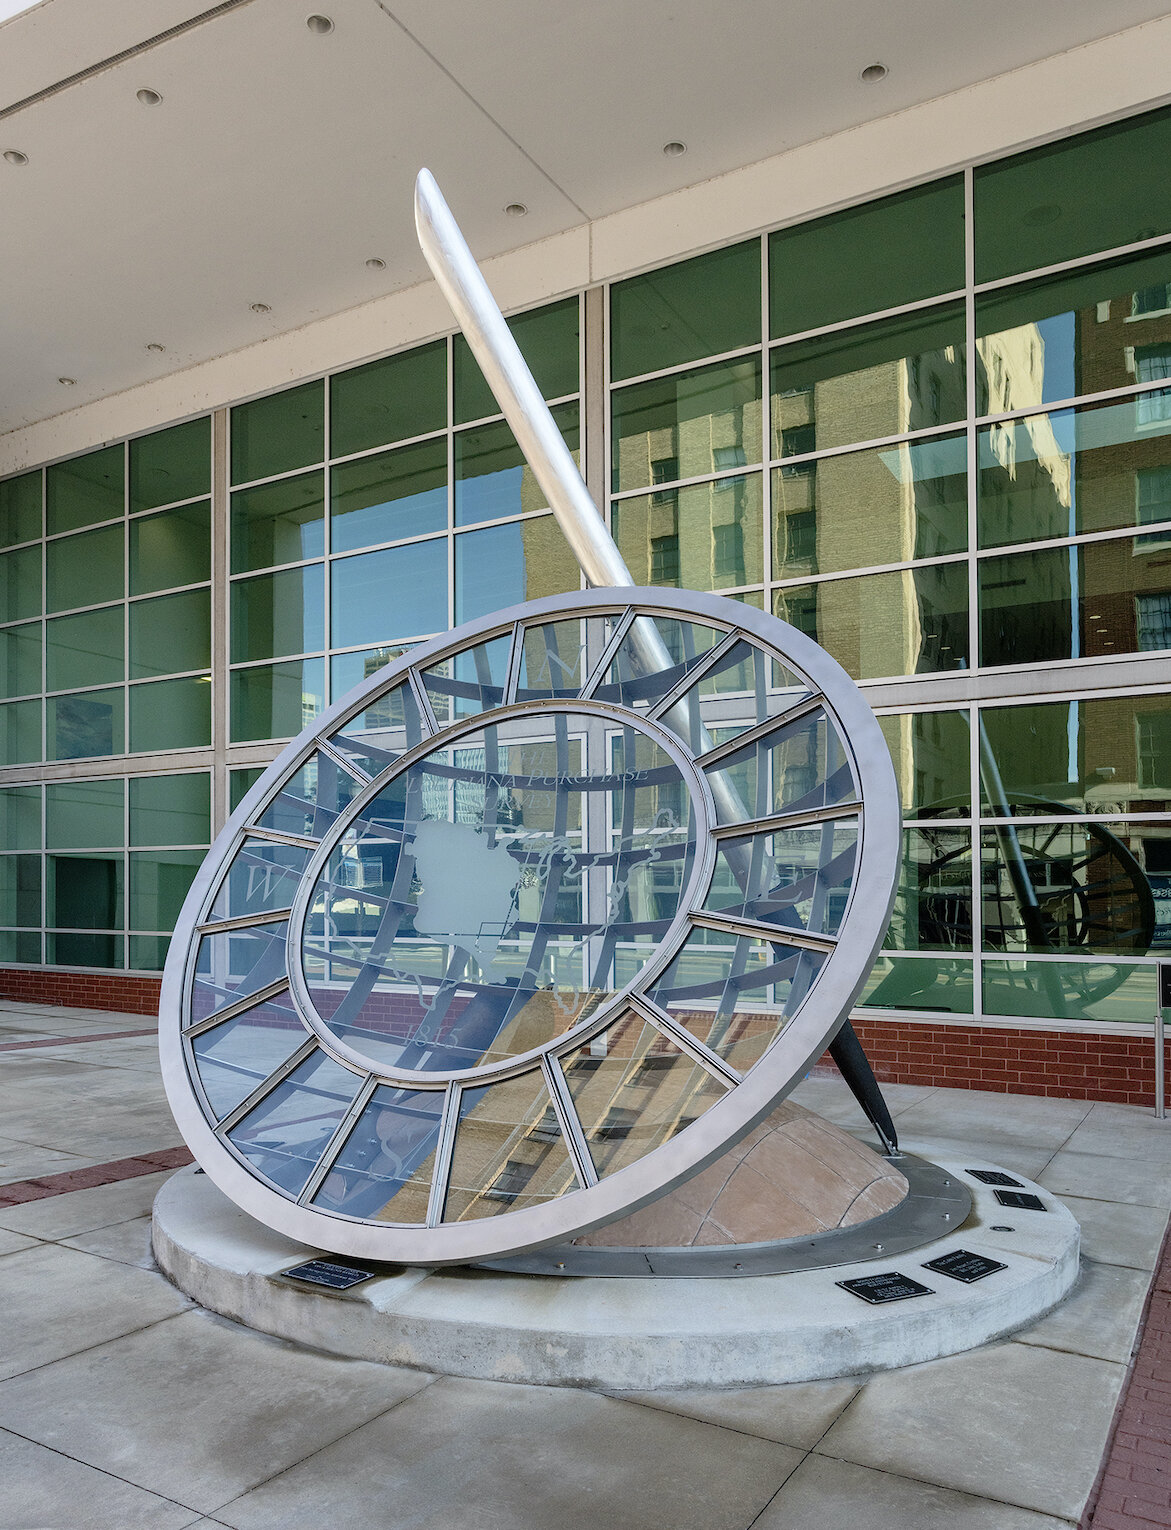   Straight Lines on a Round World ,  21’ x 15’ x 15’, stainless steel, tempered glass, cast bronze and concrete, a collaborative with artist Aaron P. Hussey, Little Rock Convention Center, 2017 